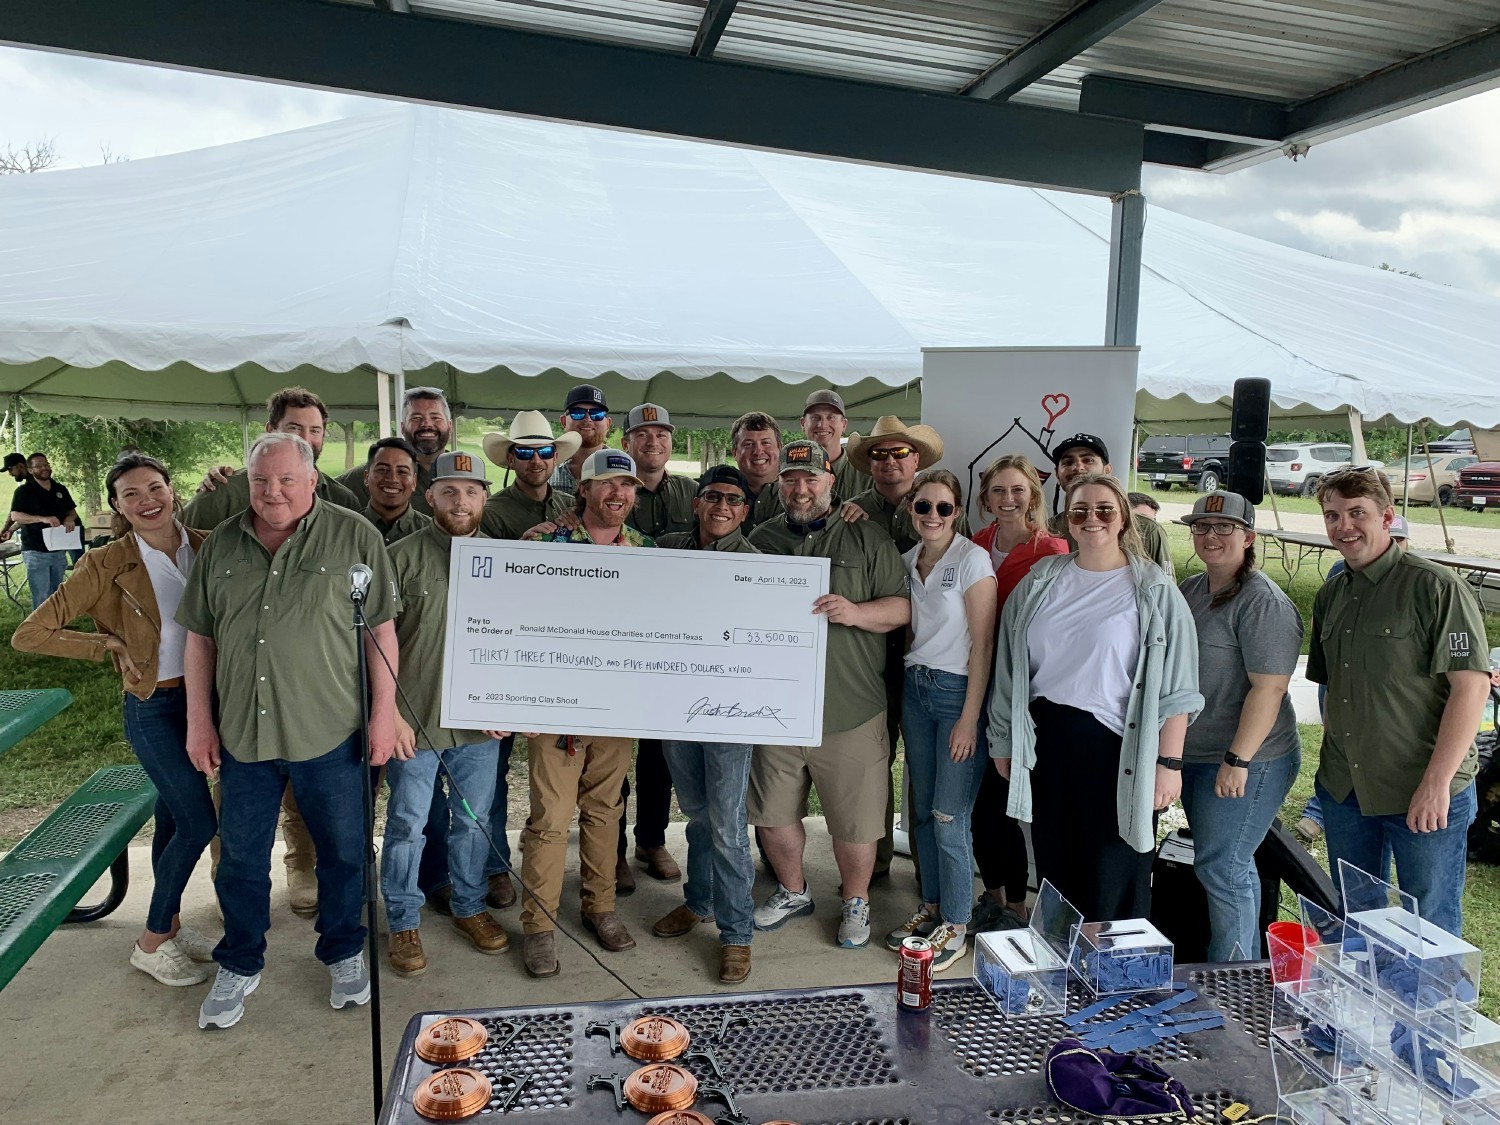 Our team in Austin raised money for the Ronald McDonald House at a clay shoot event.